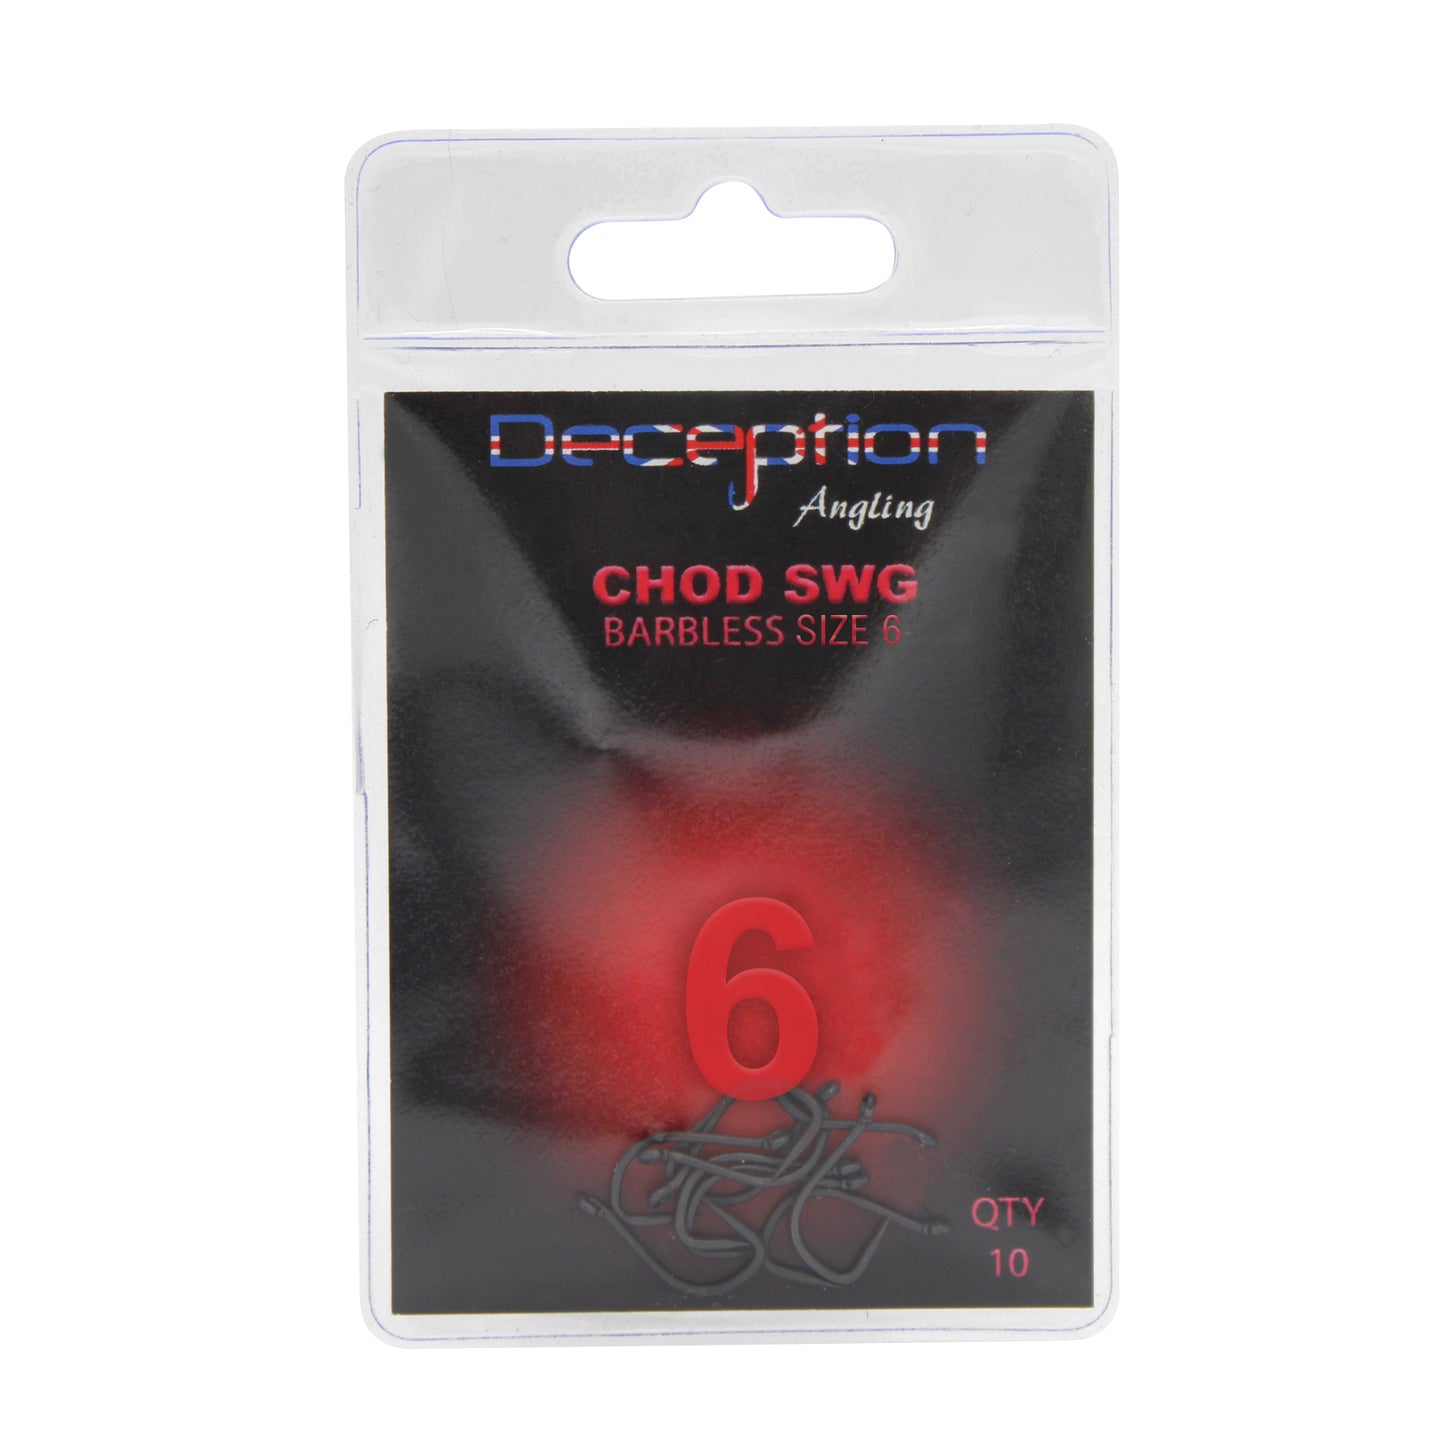 Deception Angling Chod SWG Barbless Hooks for Fishing Size 6 Pack of 10